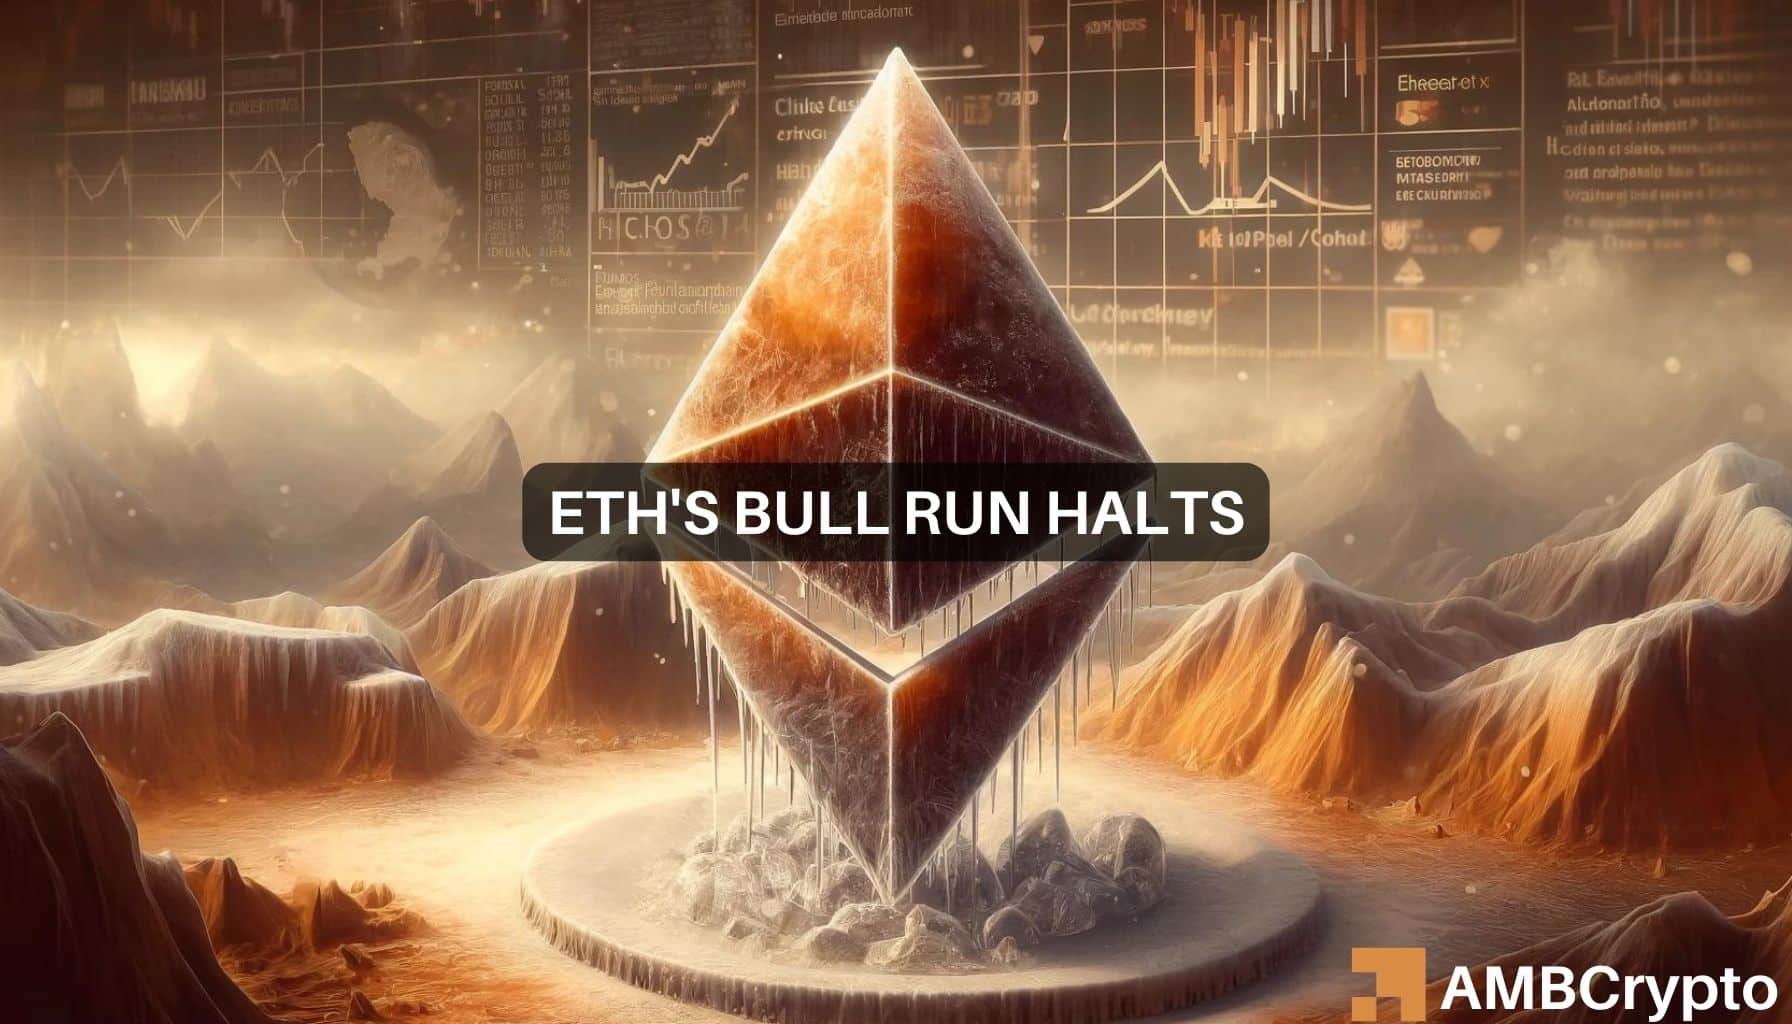 Ethereum’s bullish surge cools off – How much longer for $4k?